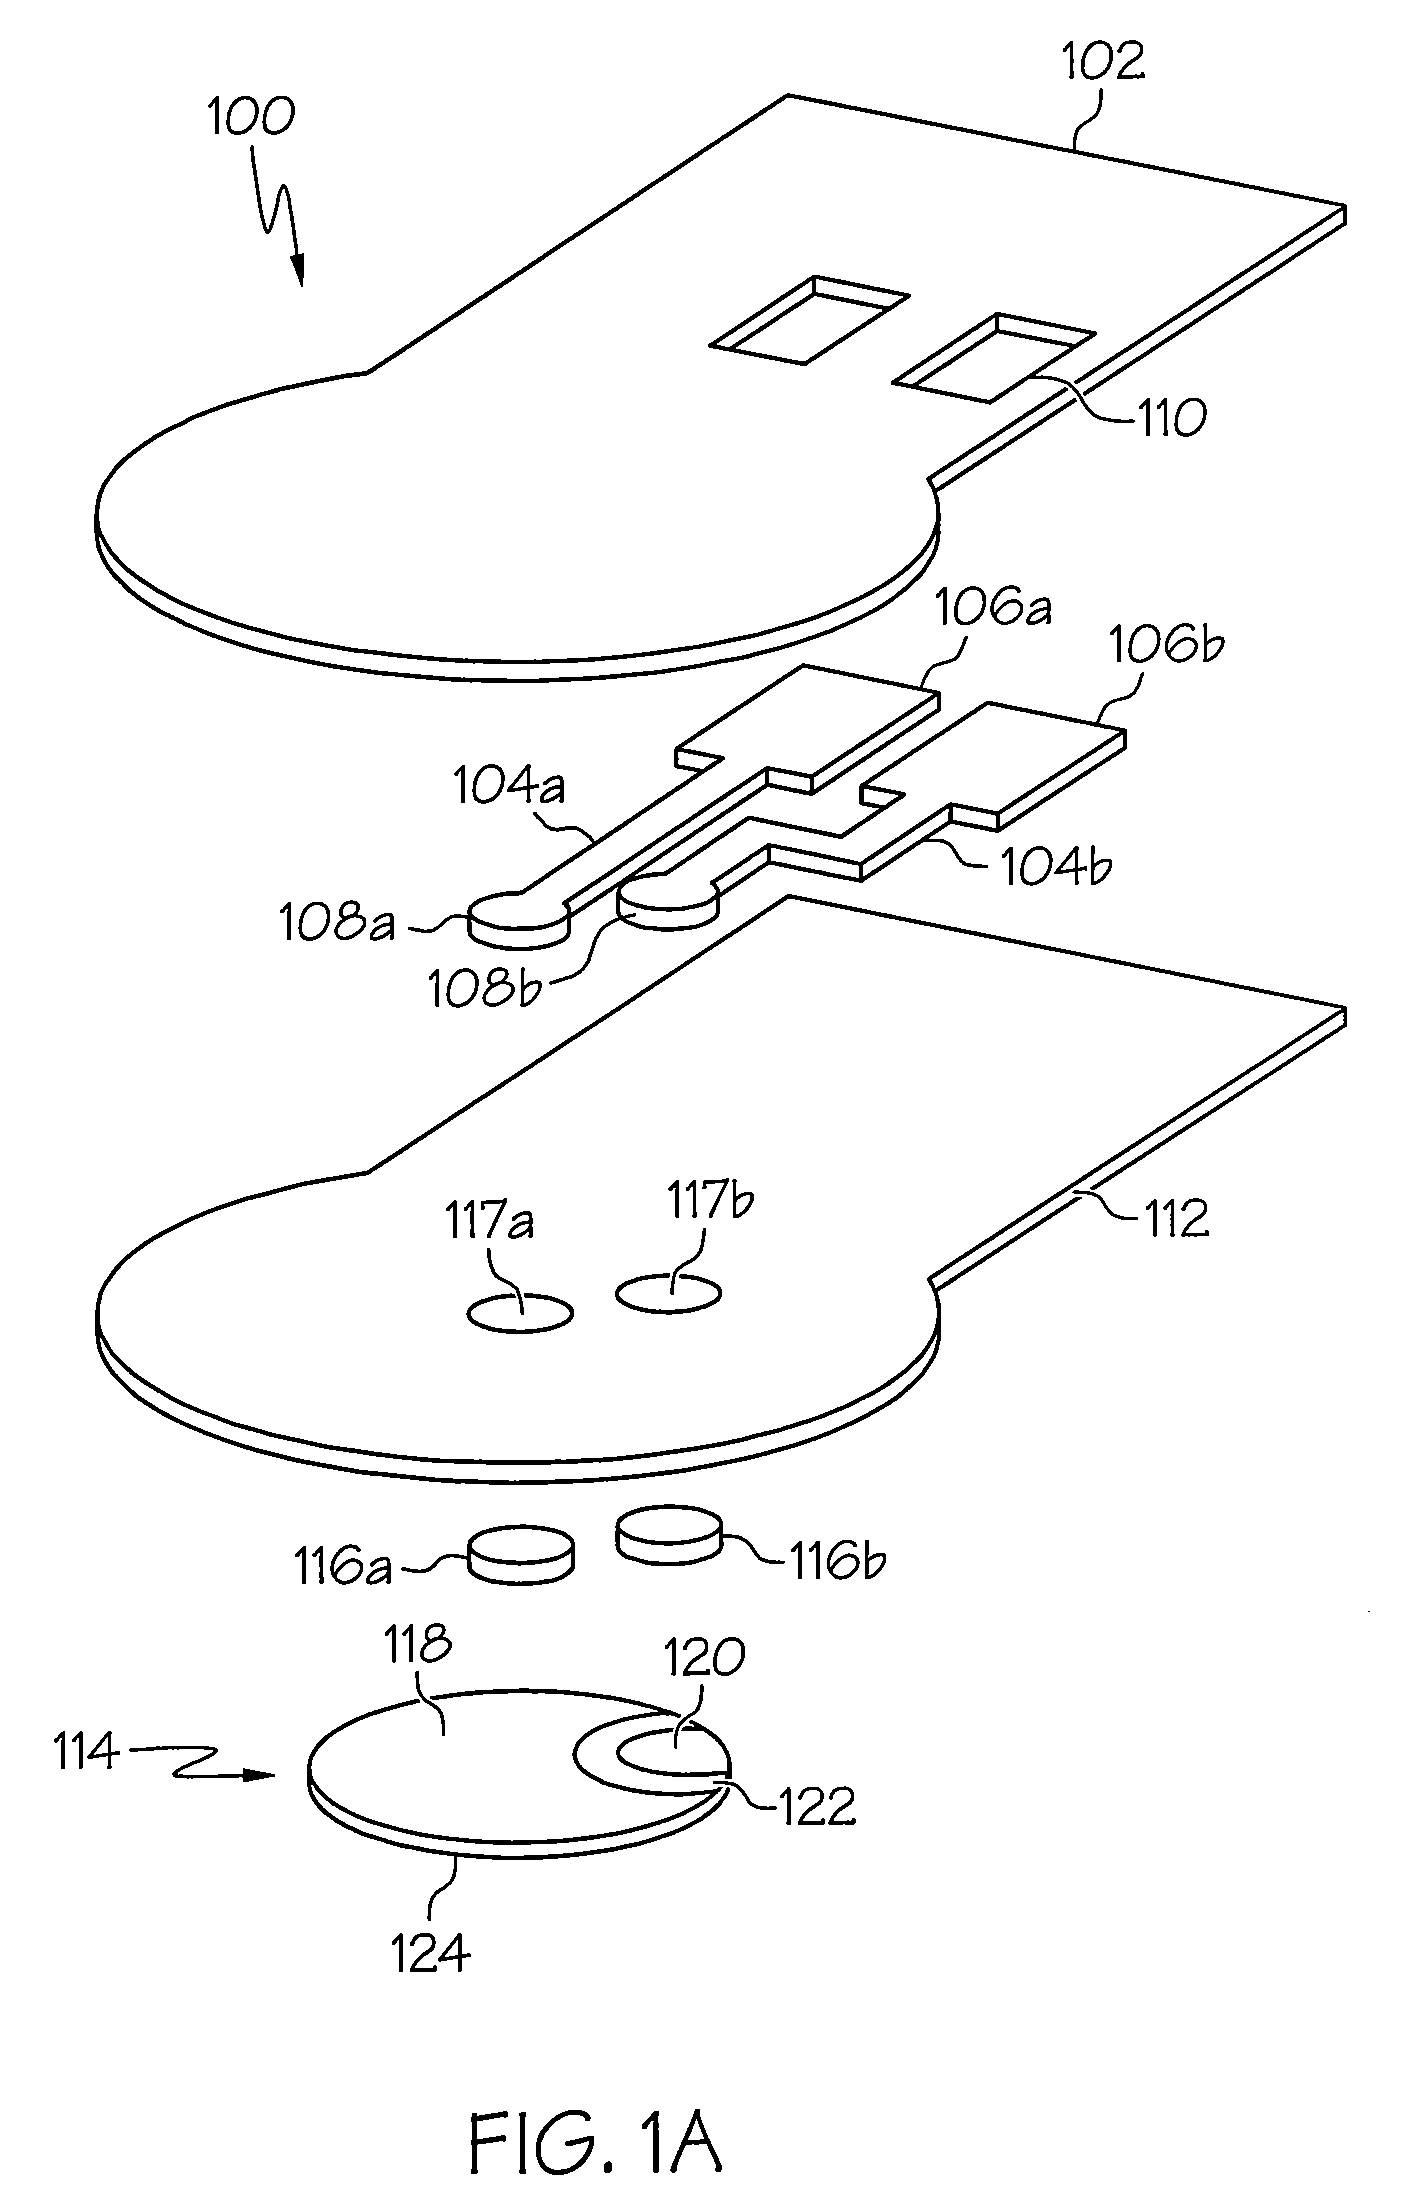 Structural health monitoring (SHM) transducer assembly and system